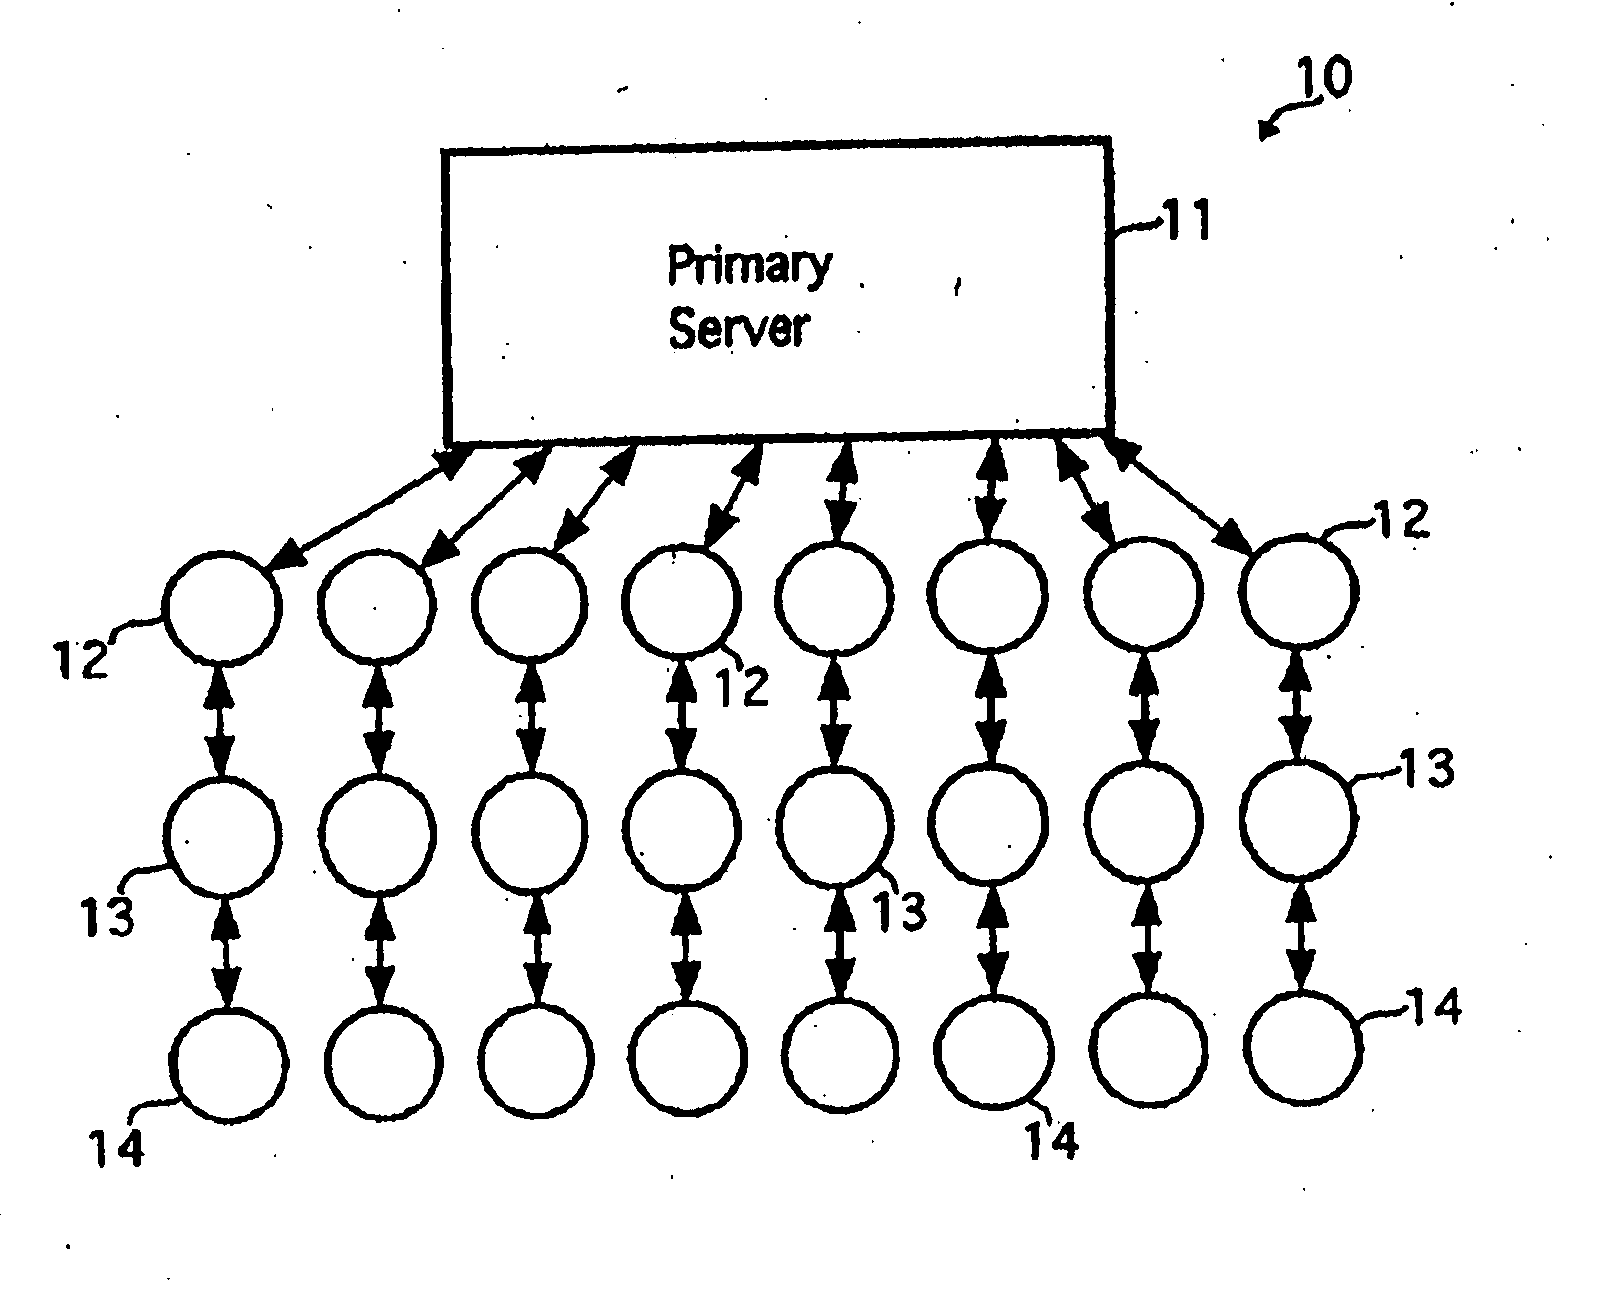 System and method for broadcasting content to nodes on computer networks